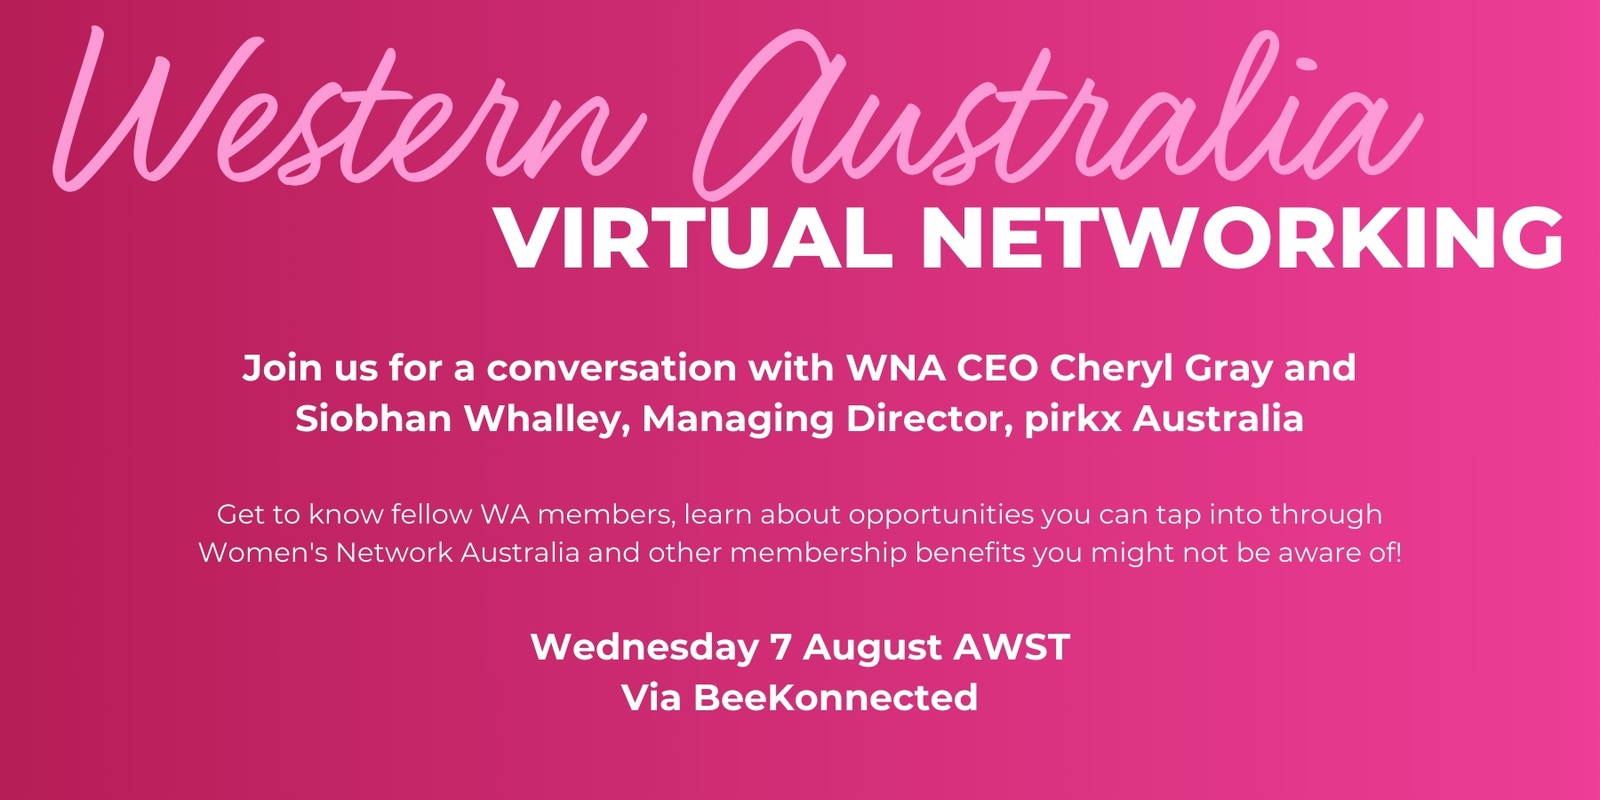 Banner image for Western Australia Virtual Networking